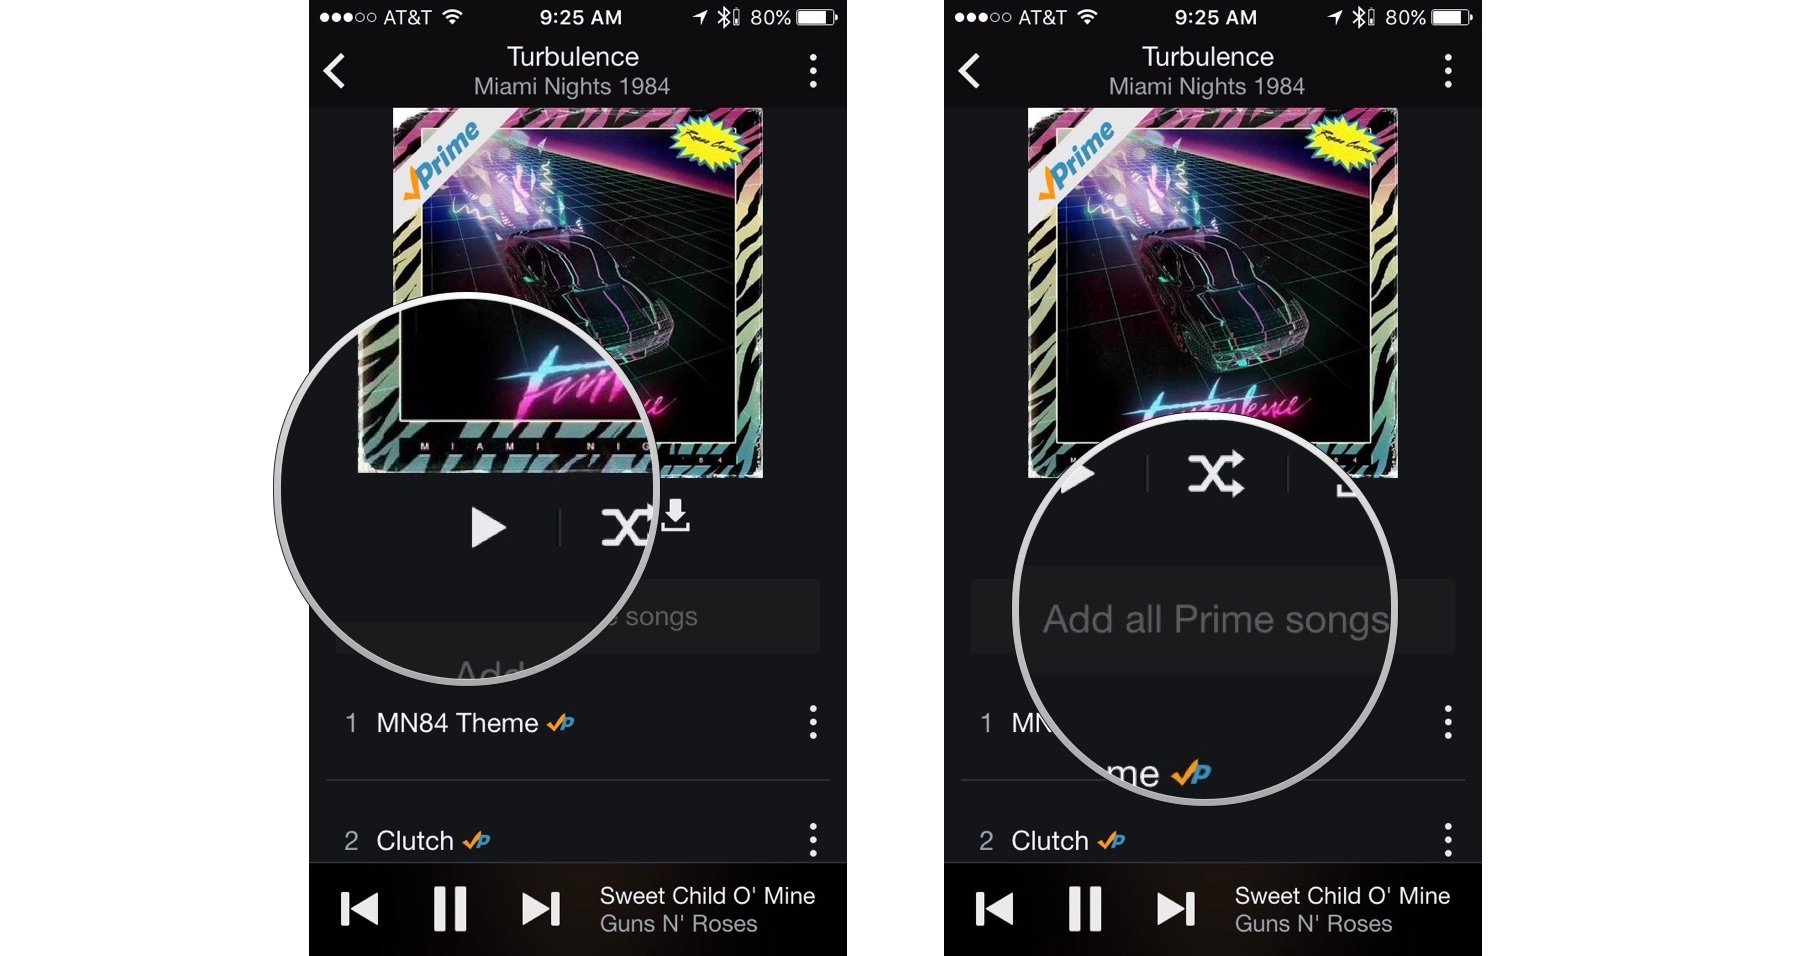 Adding tracks to library in Amazon Music